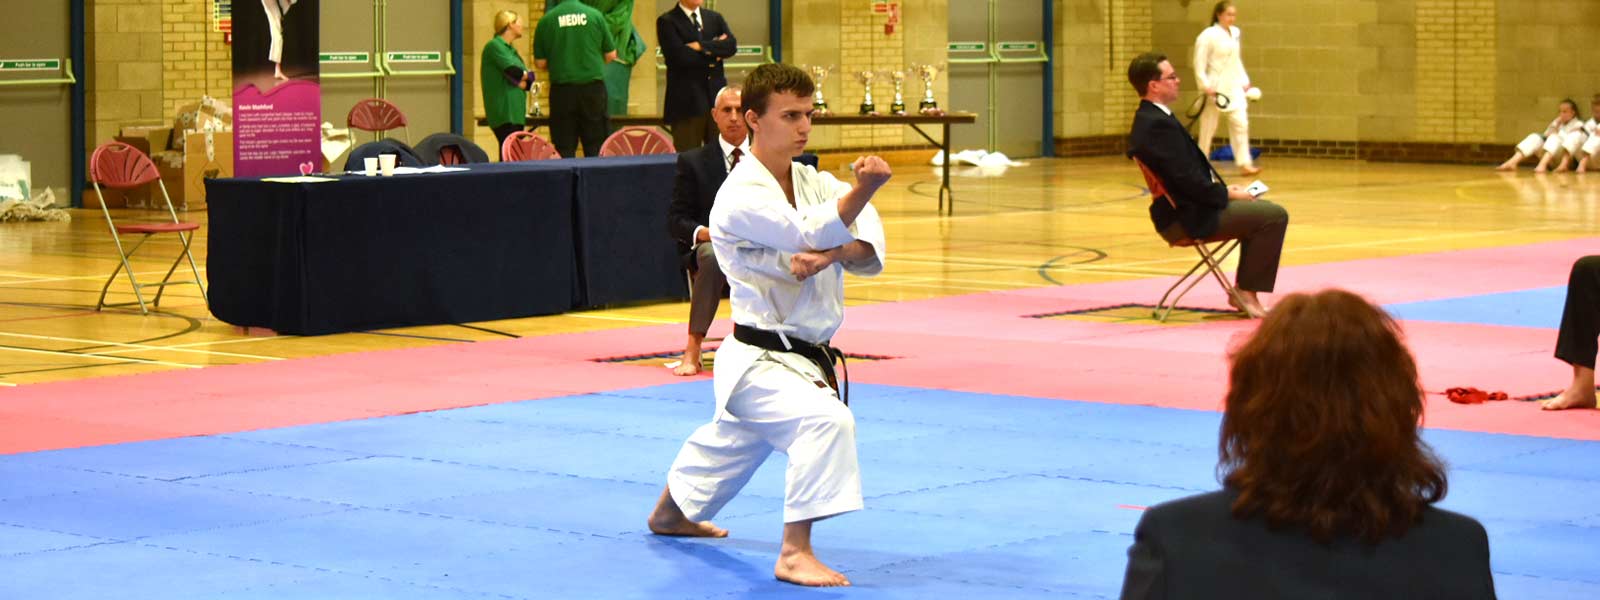 Sensei Steven Connell performing kata during the finals of the KUGB Southern Region Championships